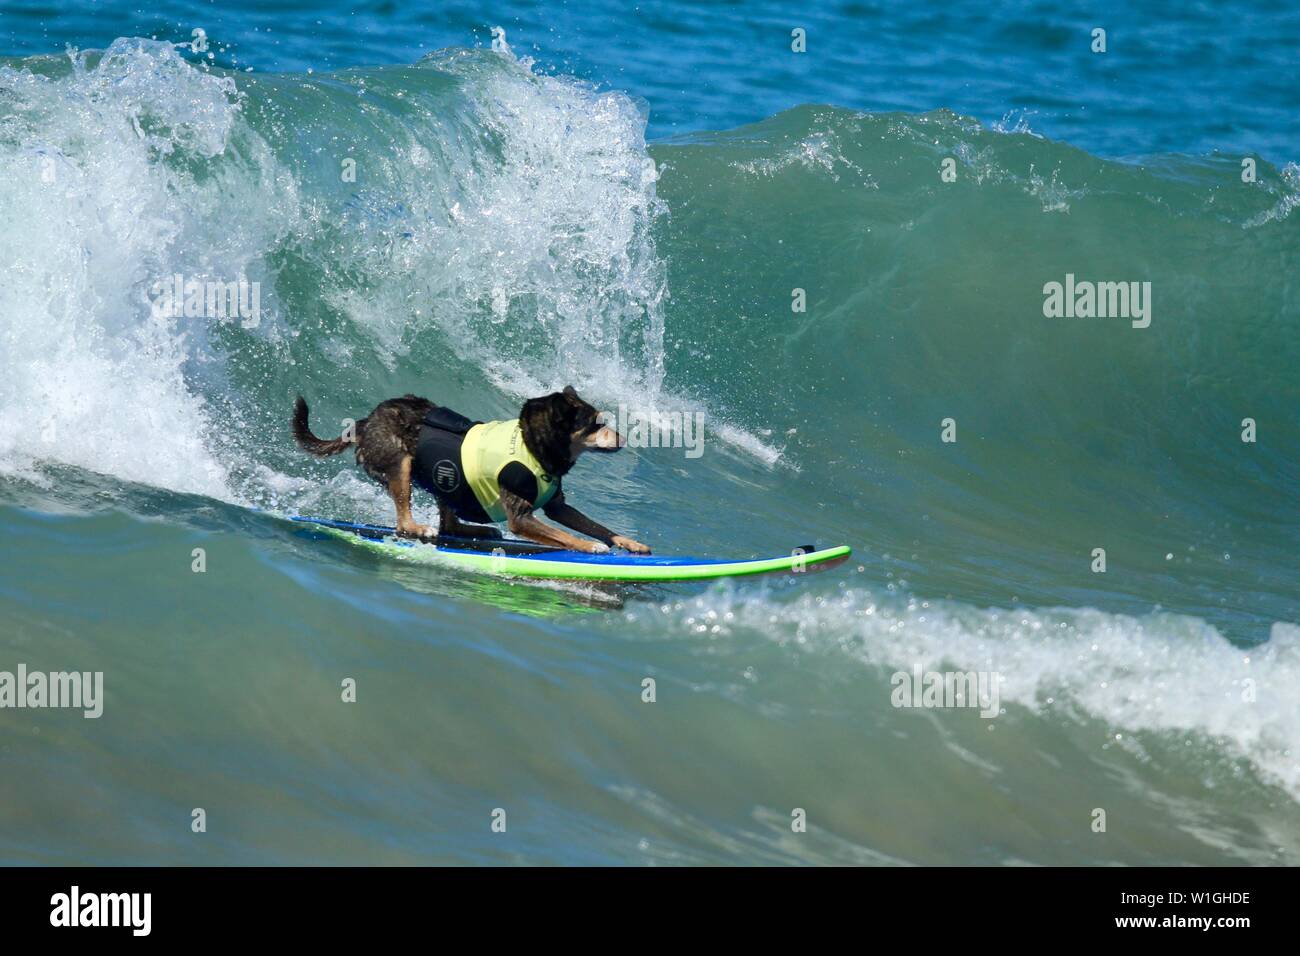 Abbie the Australian kelpie surfing dog catching a wave at a dog surfing event in Huntington Beach California Stock Photo